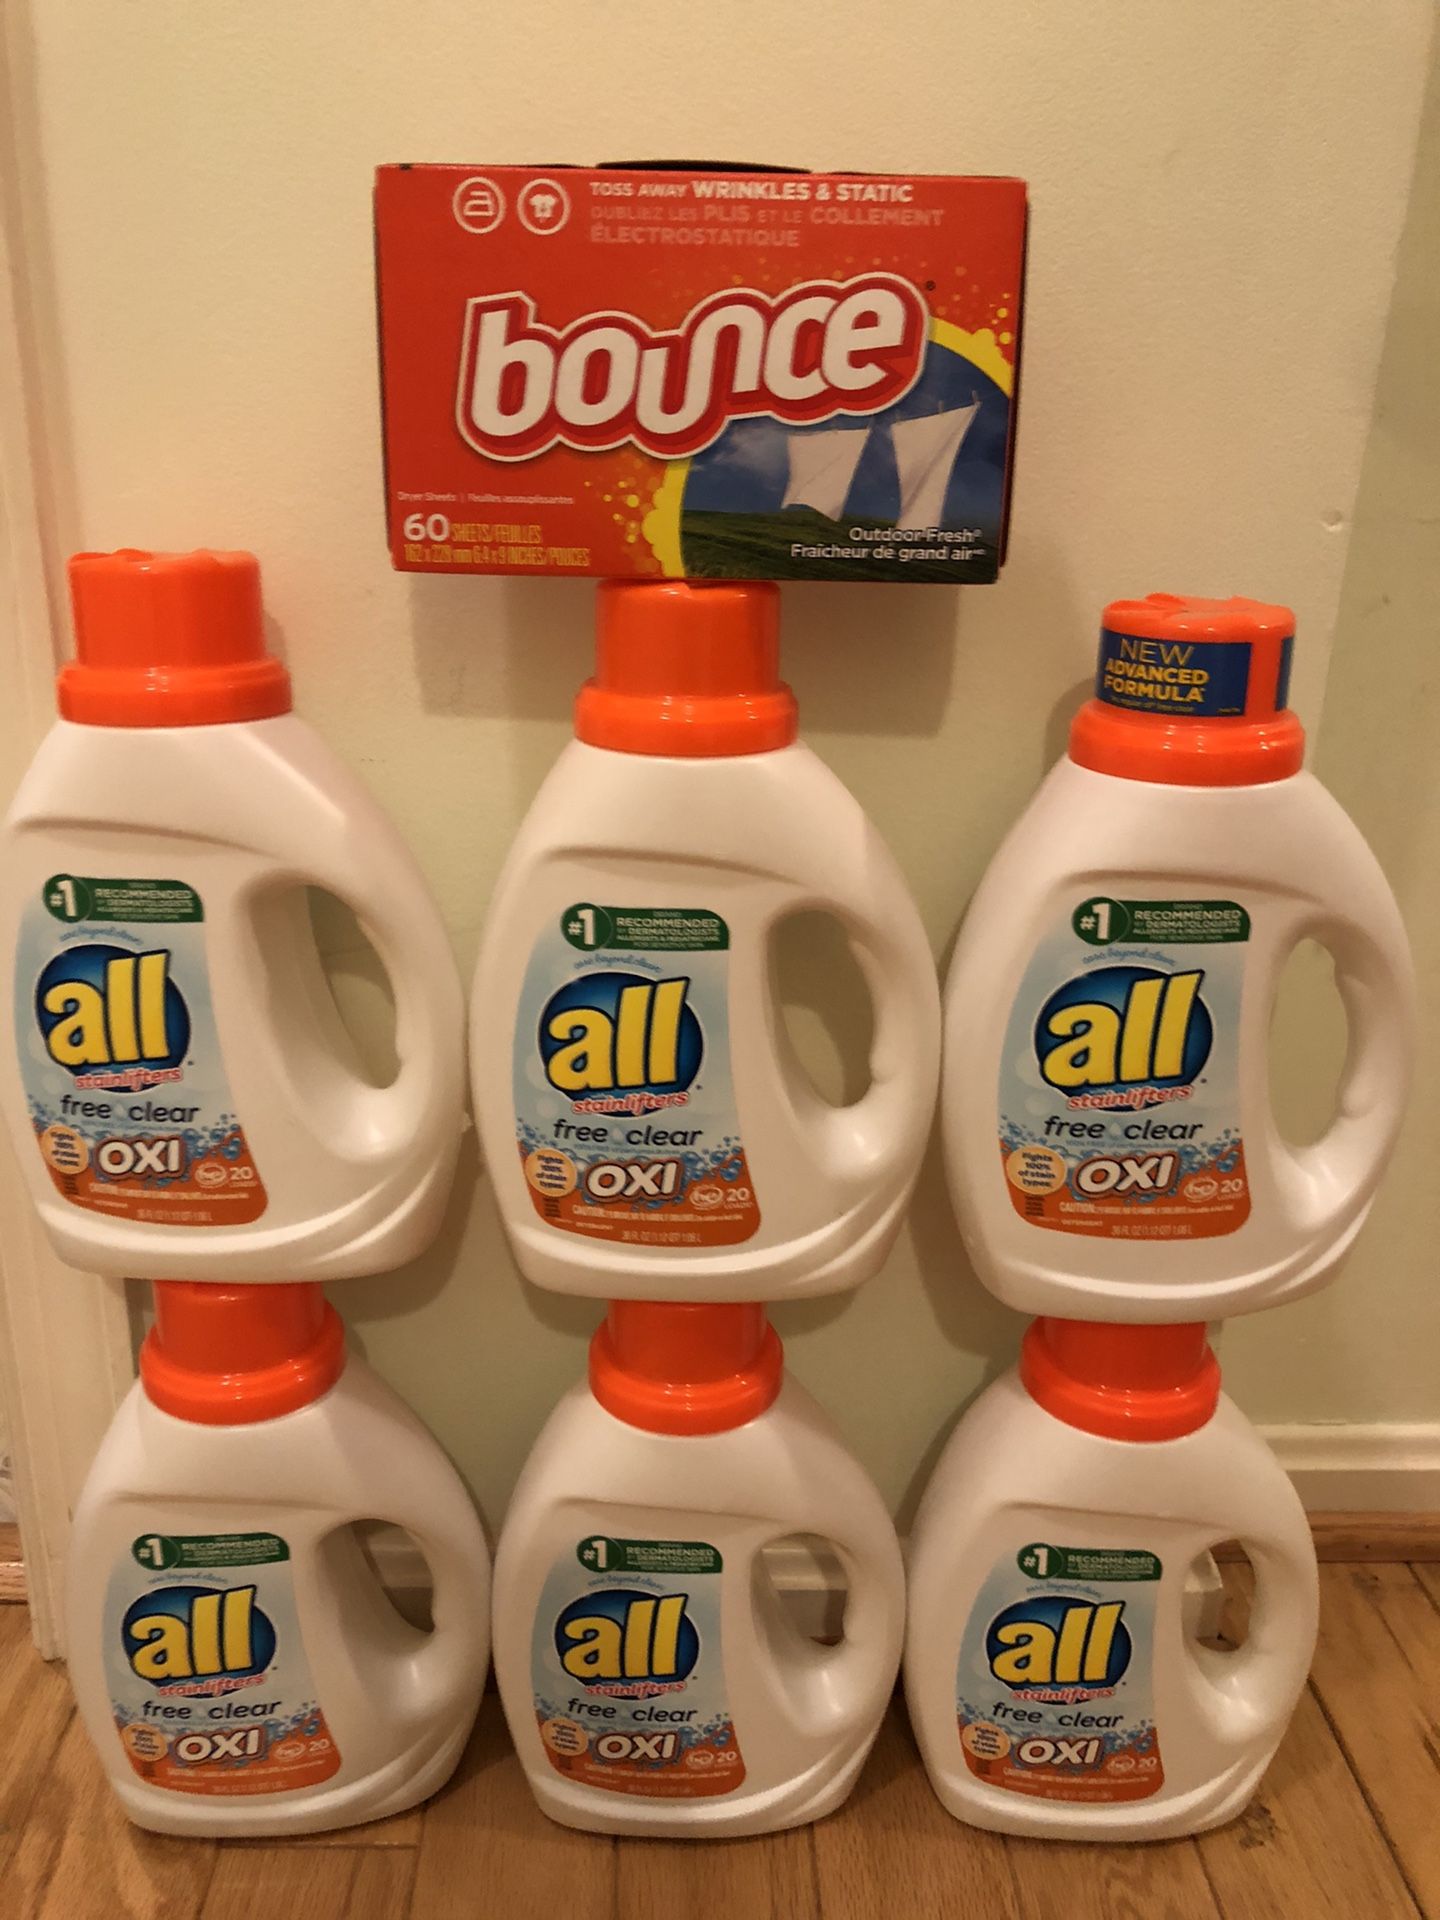 6 All laundry detergent free clear & bounce sheet bundle